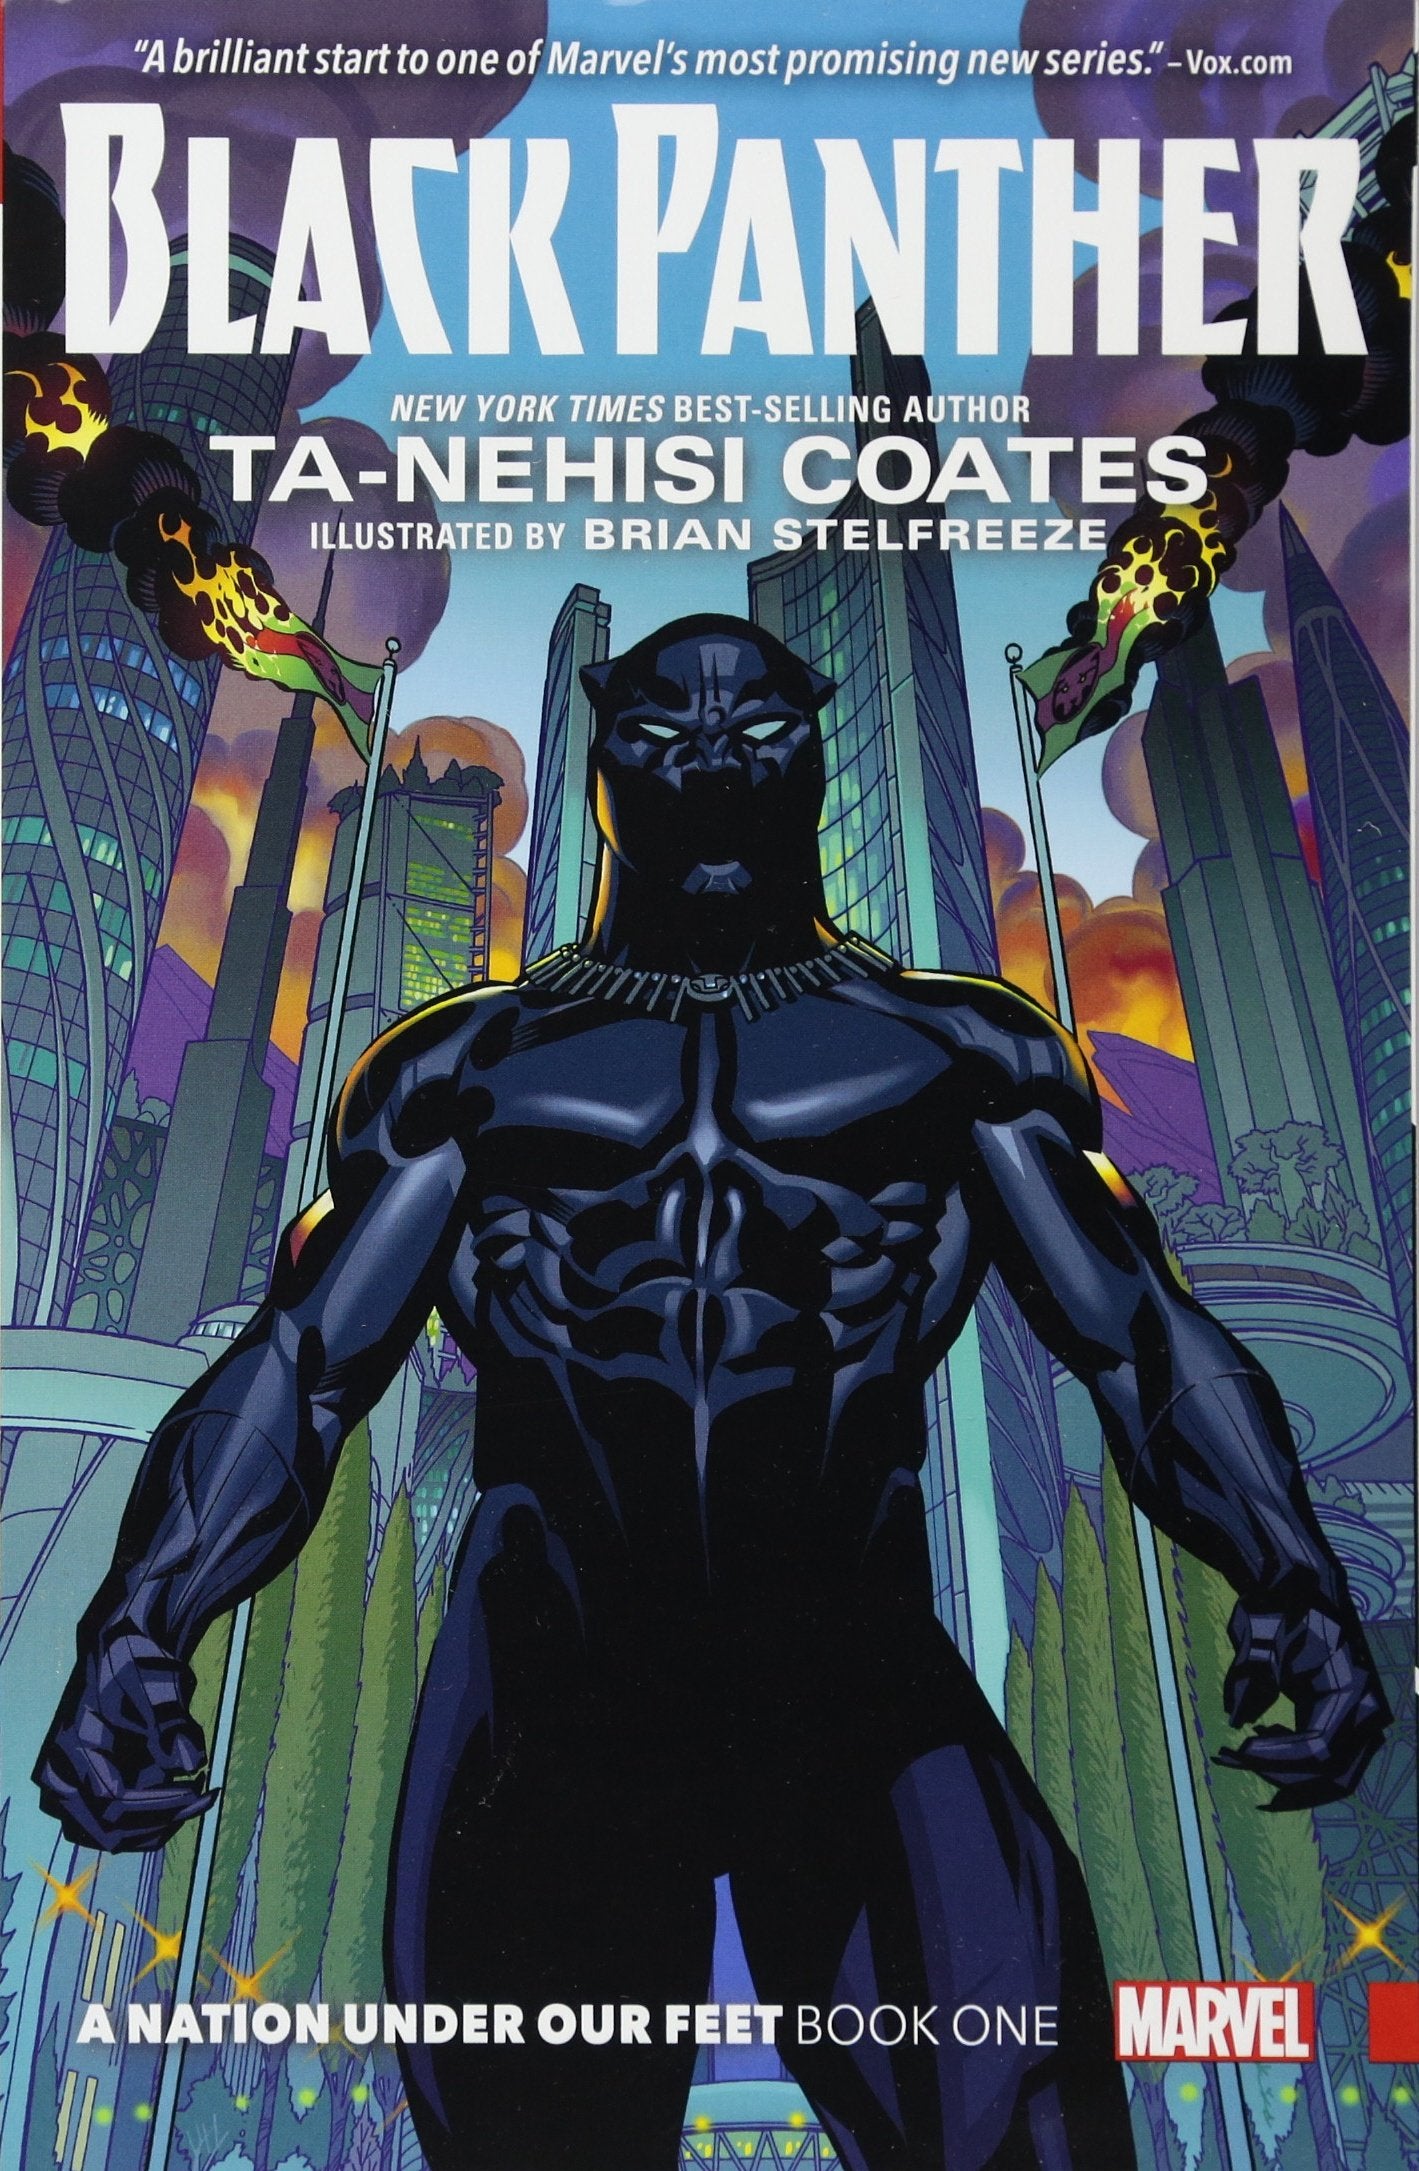 Black Panther: A Nation Under Our Feet Book 1 (Paperback)